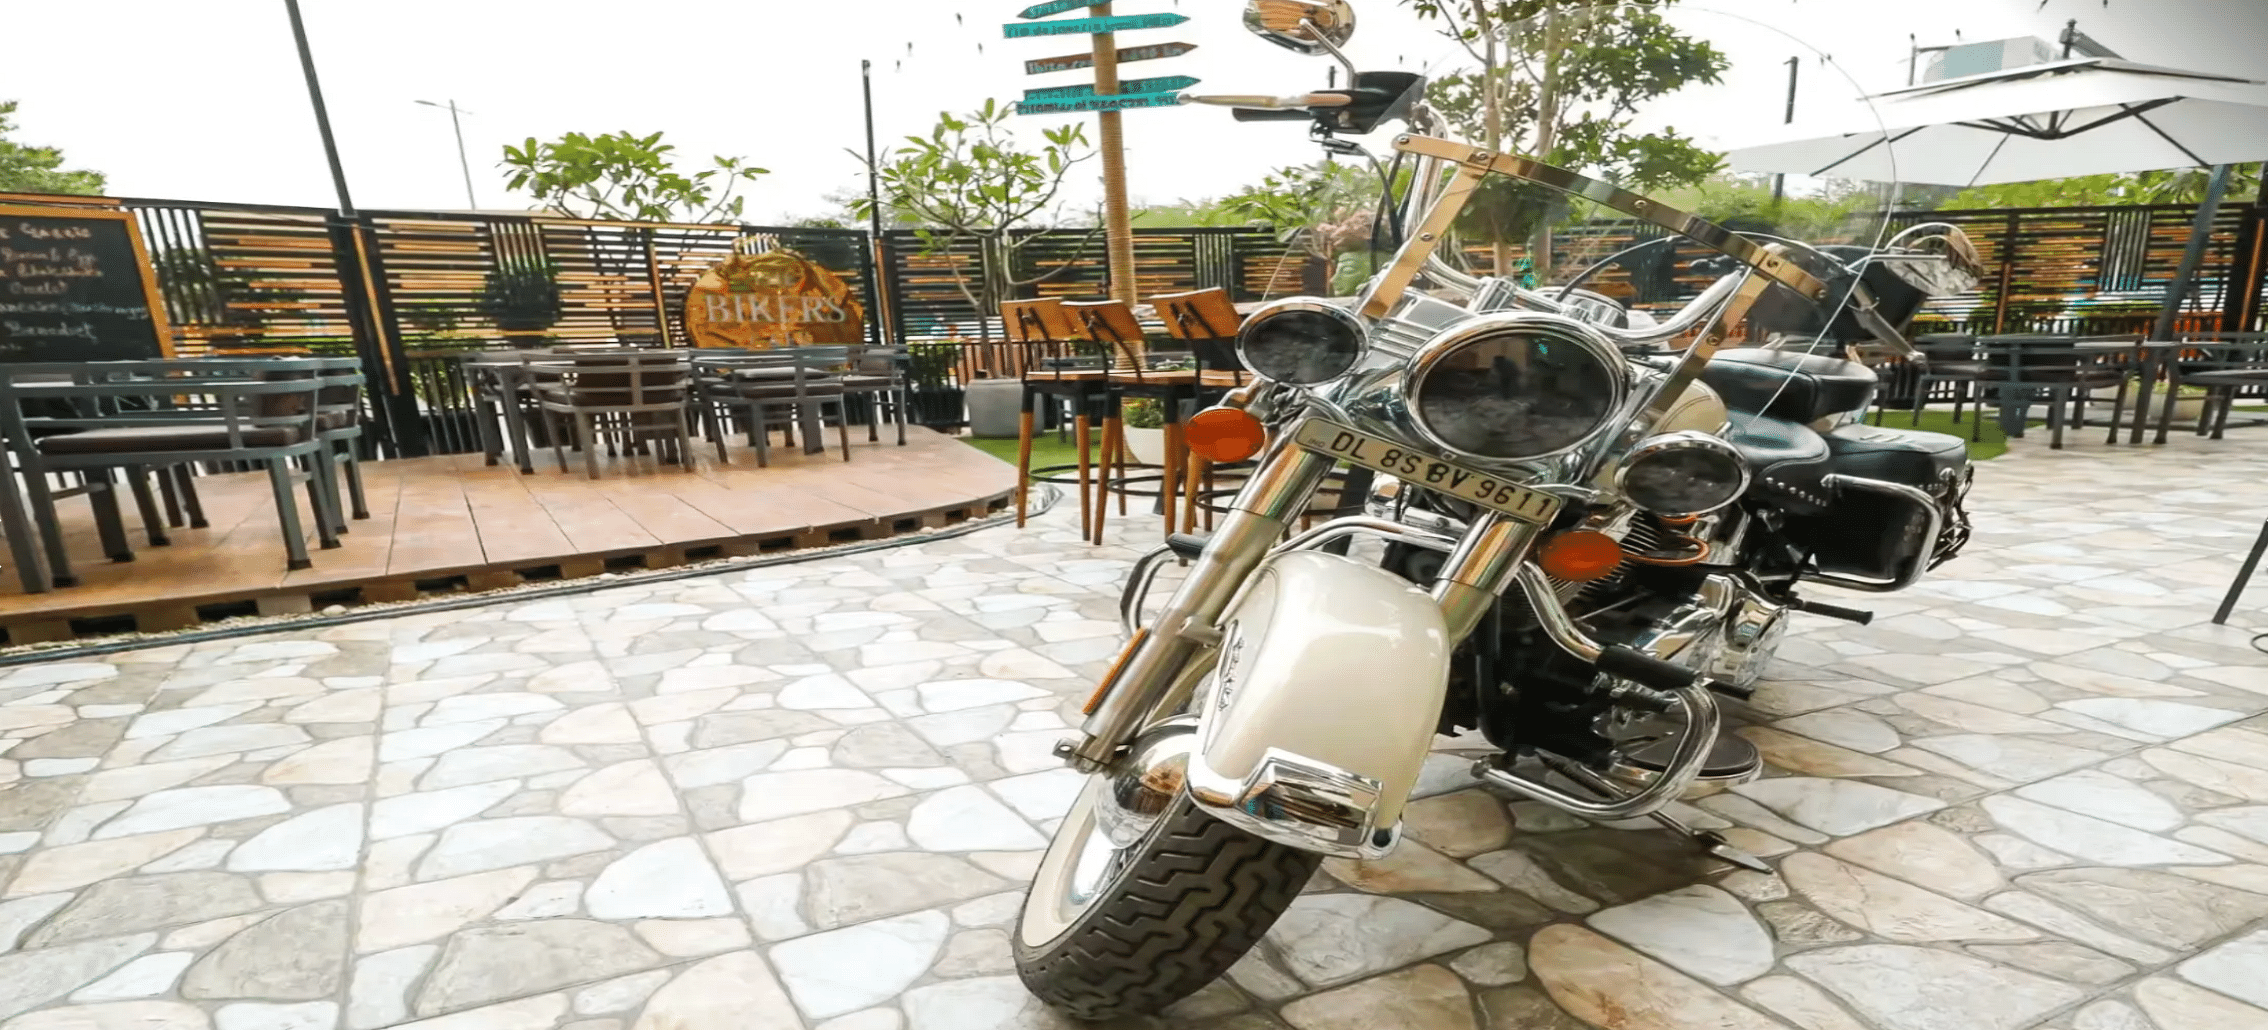 Bikers Cafe in Golf Course Road, Gurgaon